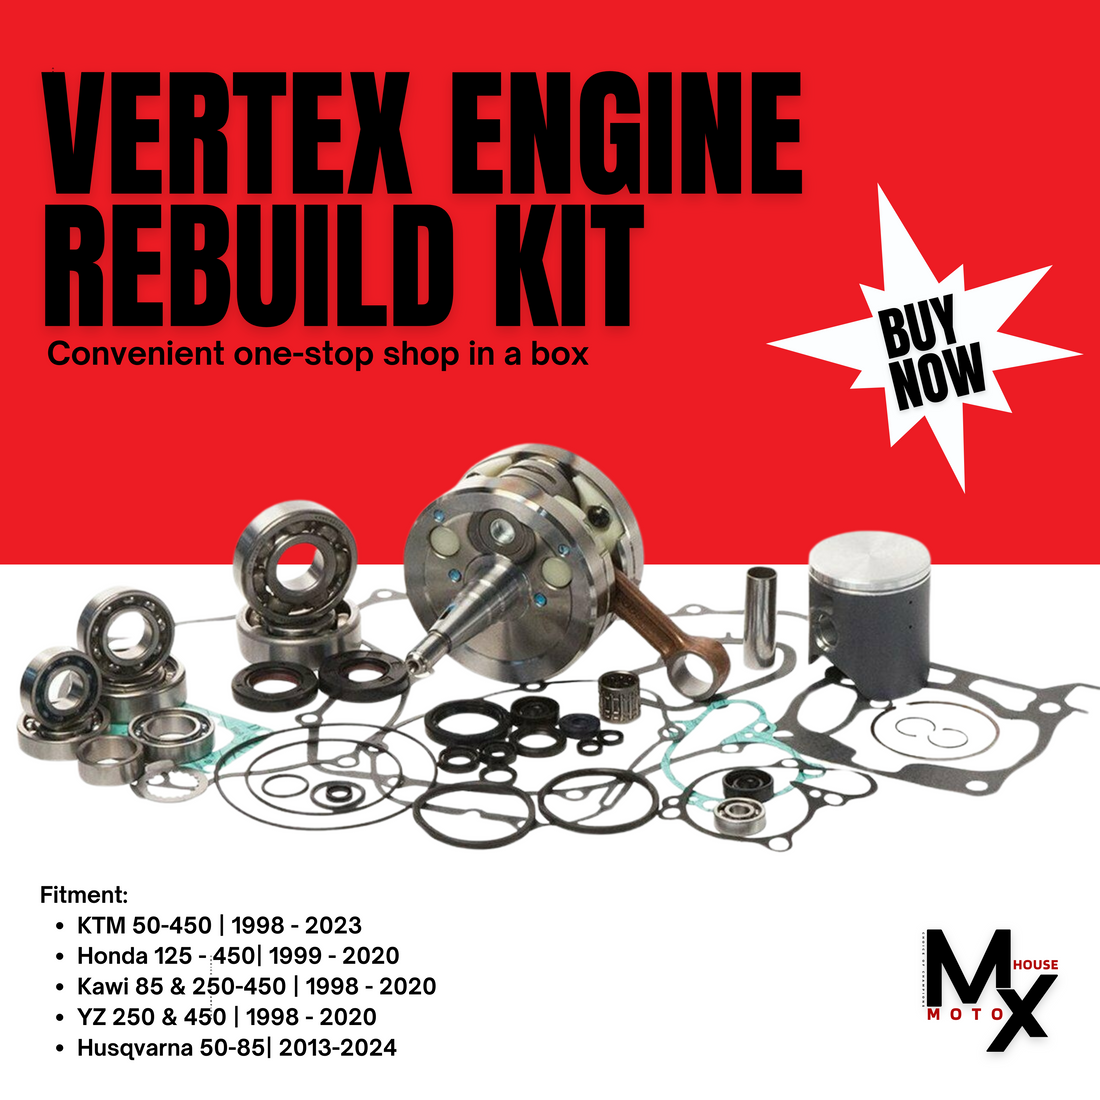 Ready to bring your Dirt Bike back to life? Vertex Complete Engine Rebuild Kit